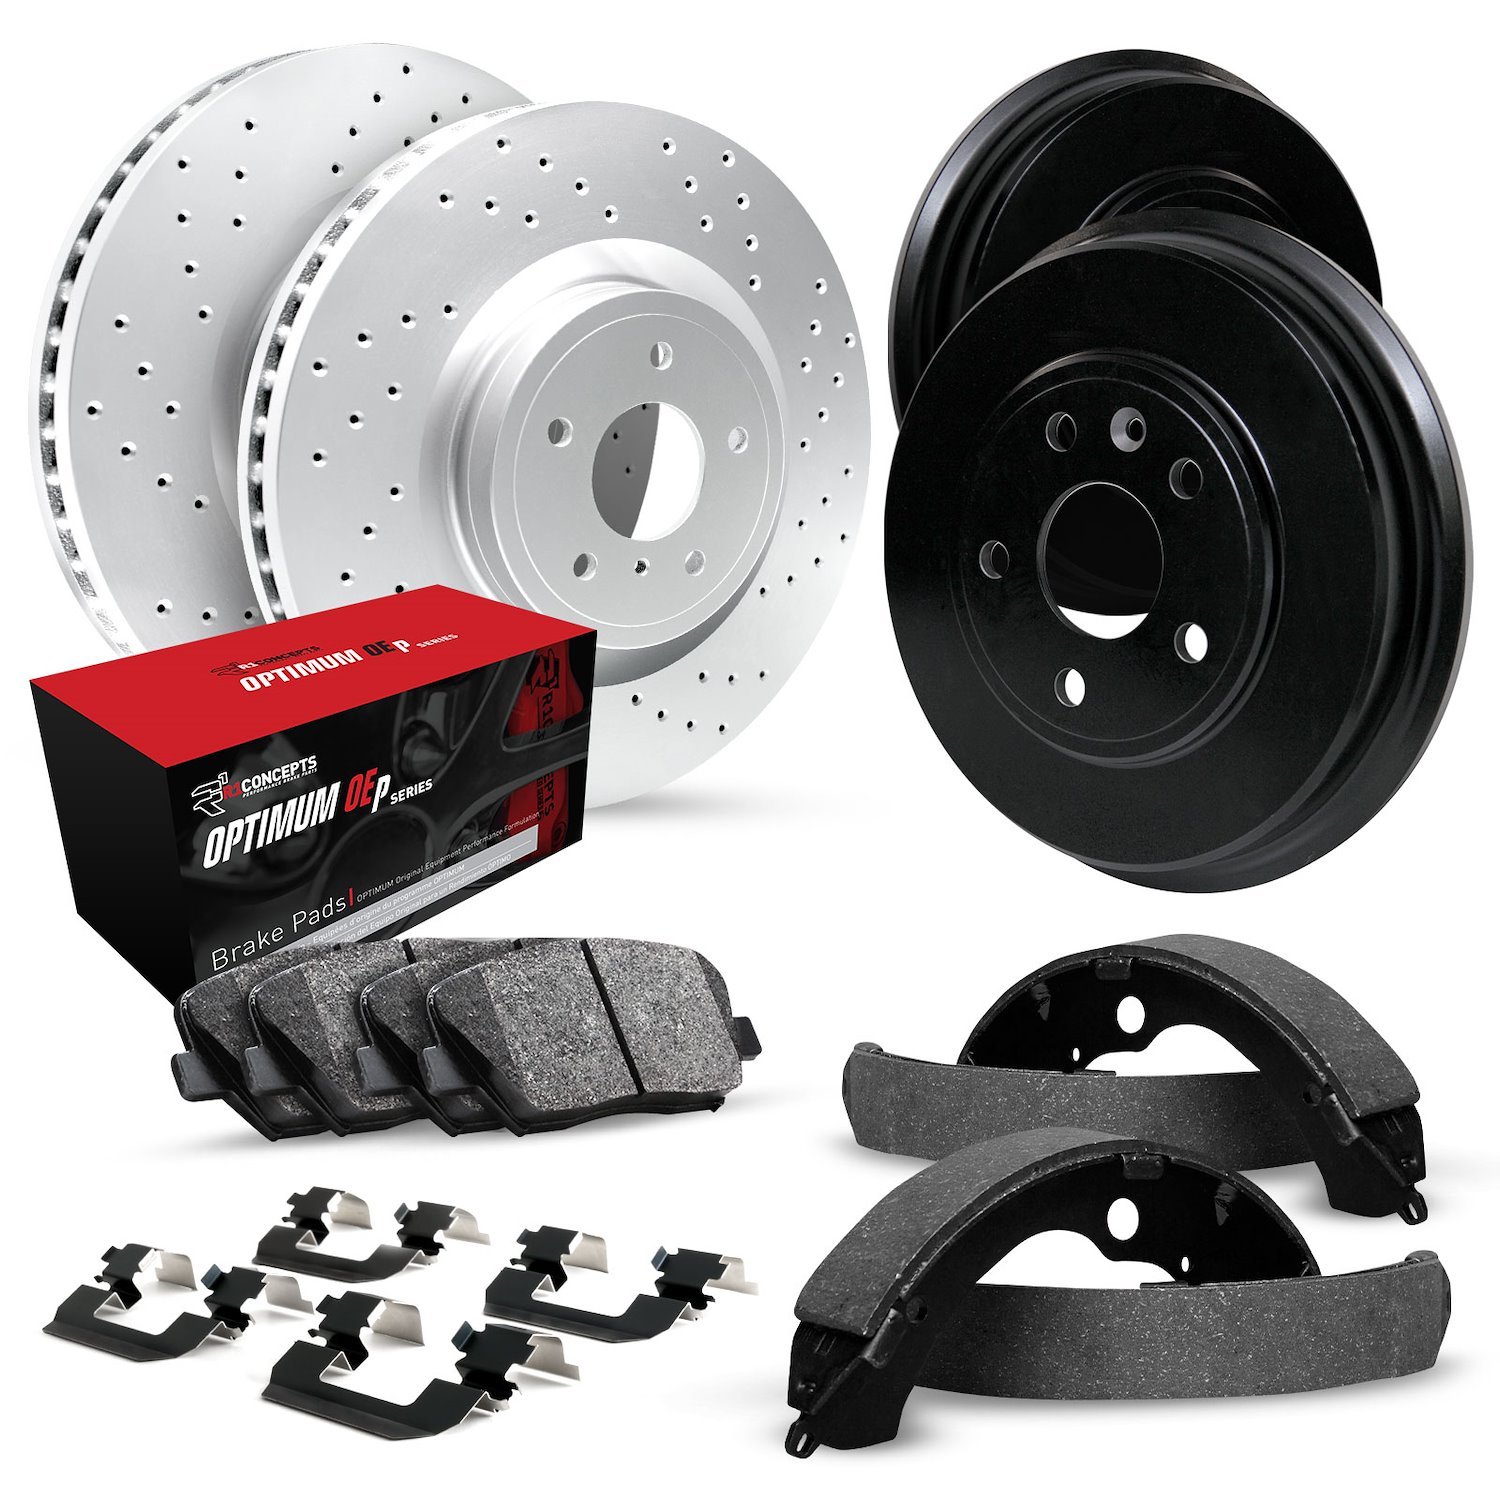 GEO-Carbon Drilled Brake Rotor & Drum Set w/Optimum OE Pads, Shoes, & Hardware, 2002-2005 Land Rover, Position: Front & Rear